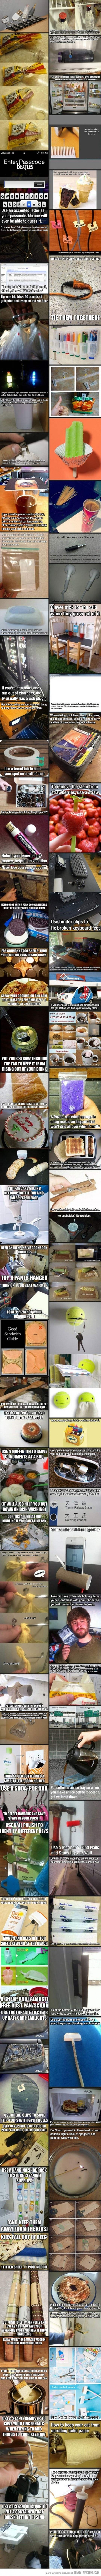 A series of photos showing some very clever tricks! – FB Troublemakers